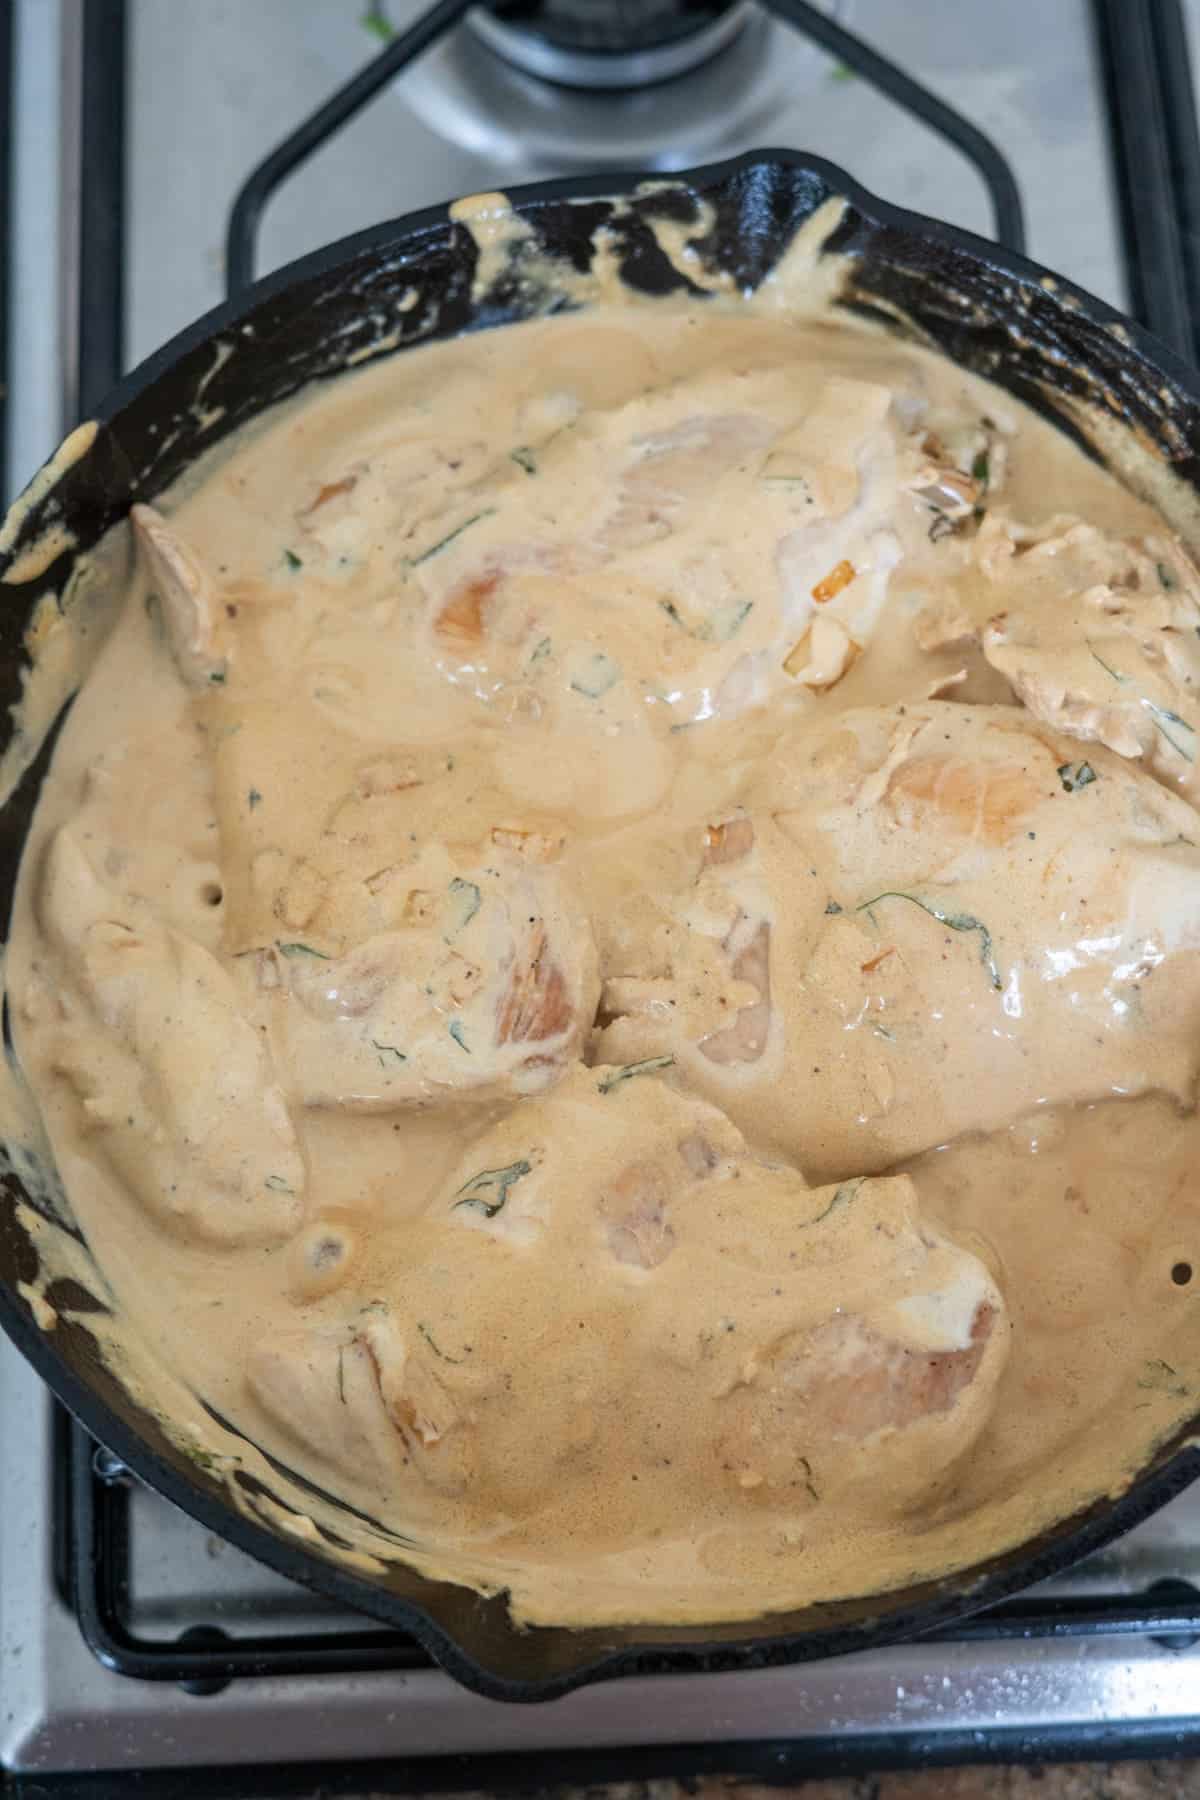 Tarragon chicken cooked in a skillet with a creamy sauce.